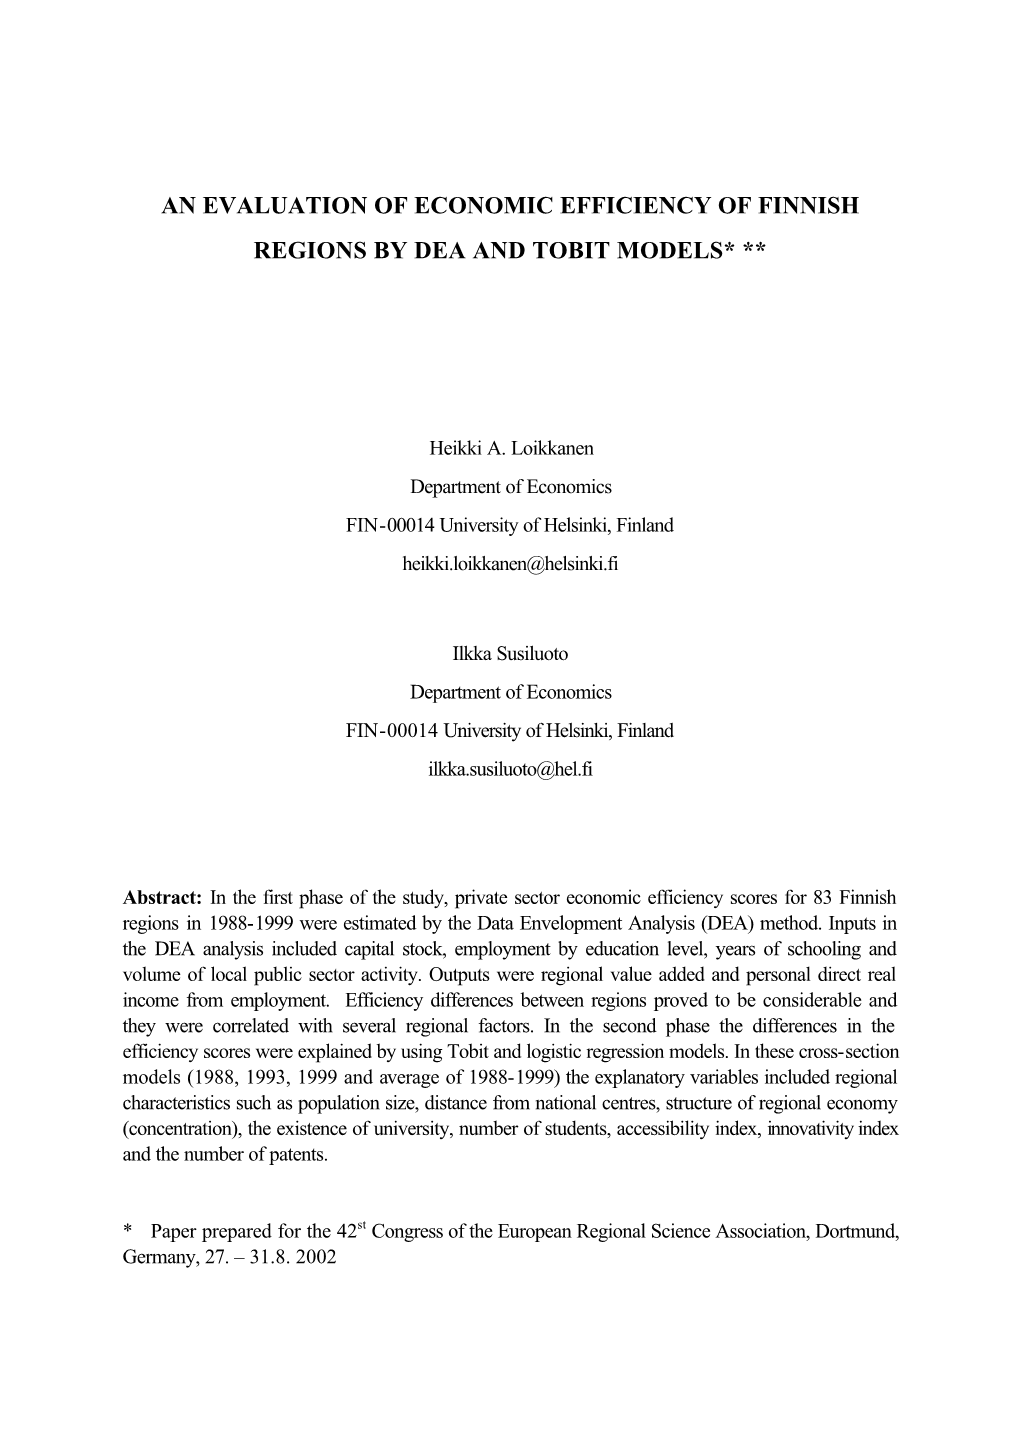 An Evaluation of Economic Efficiency of Finnish Regions by Dea and Tobit Models* **